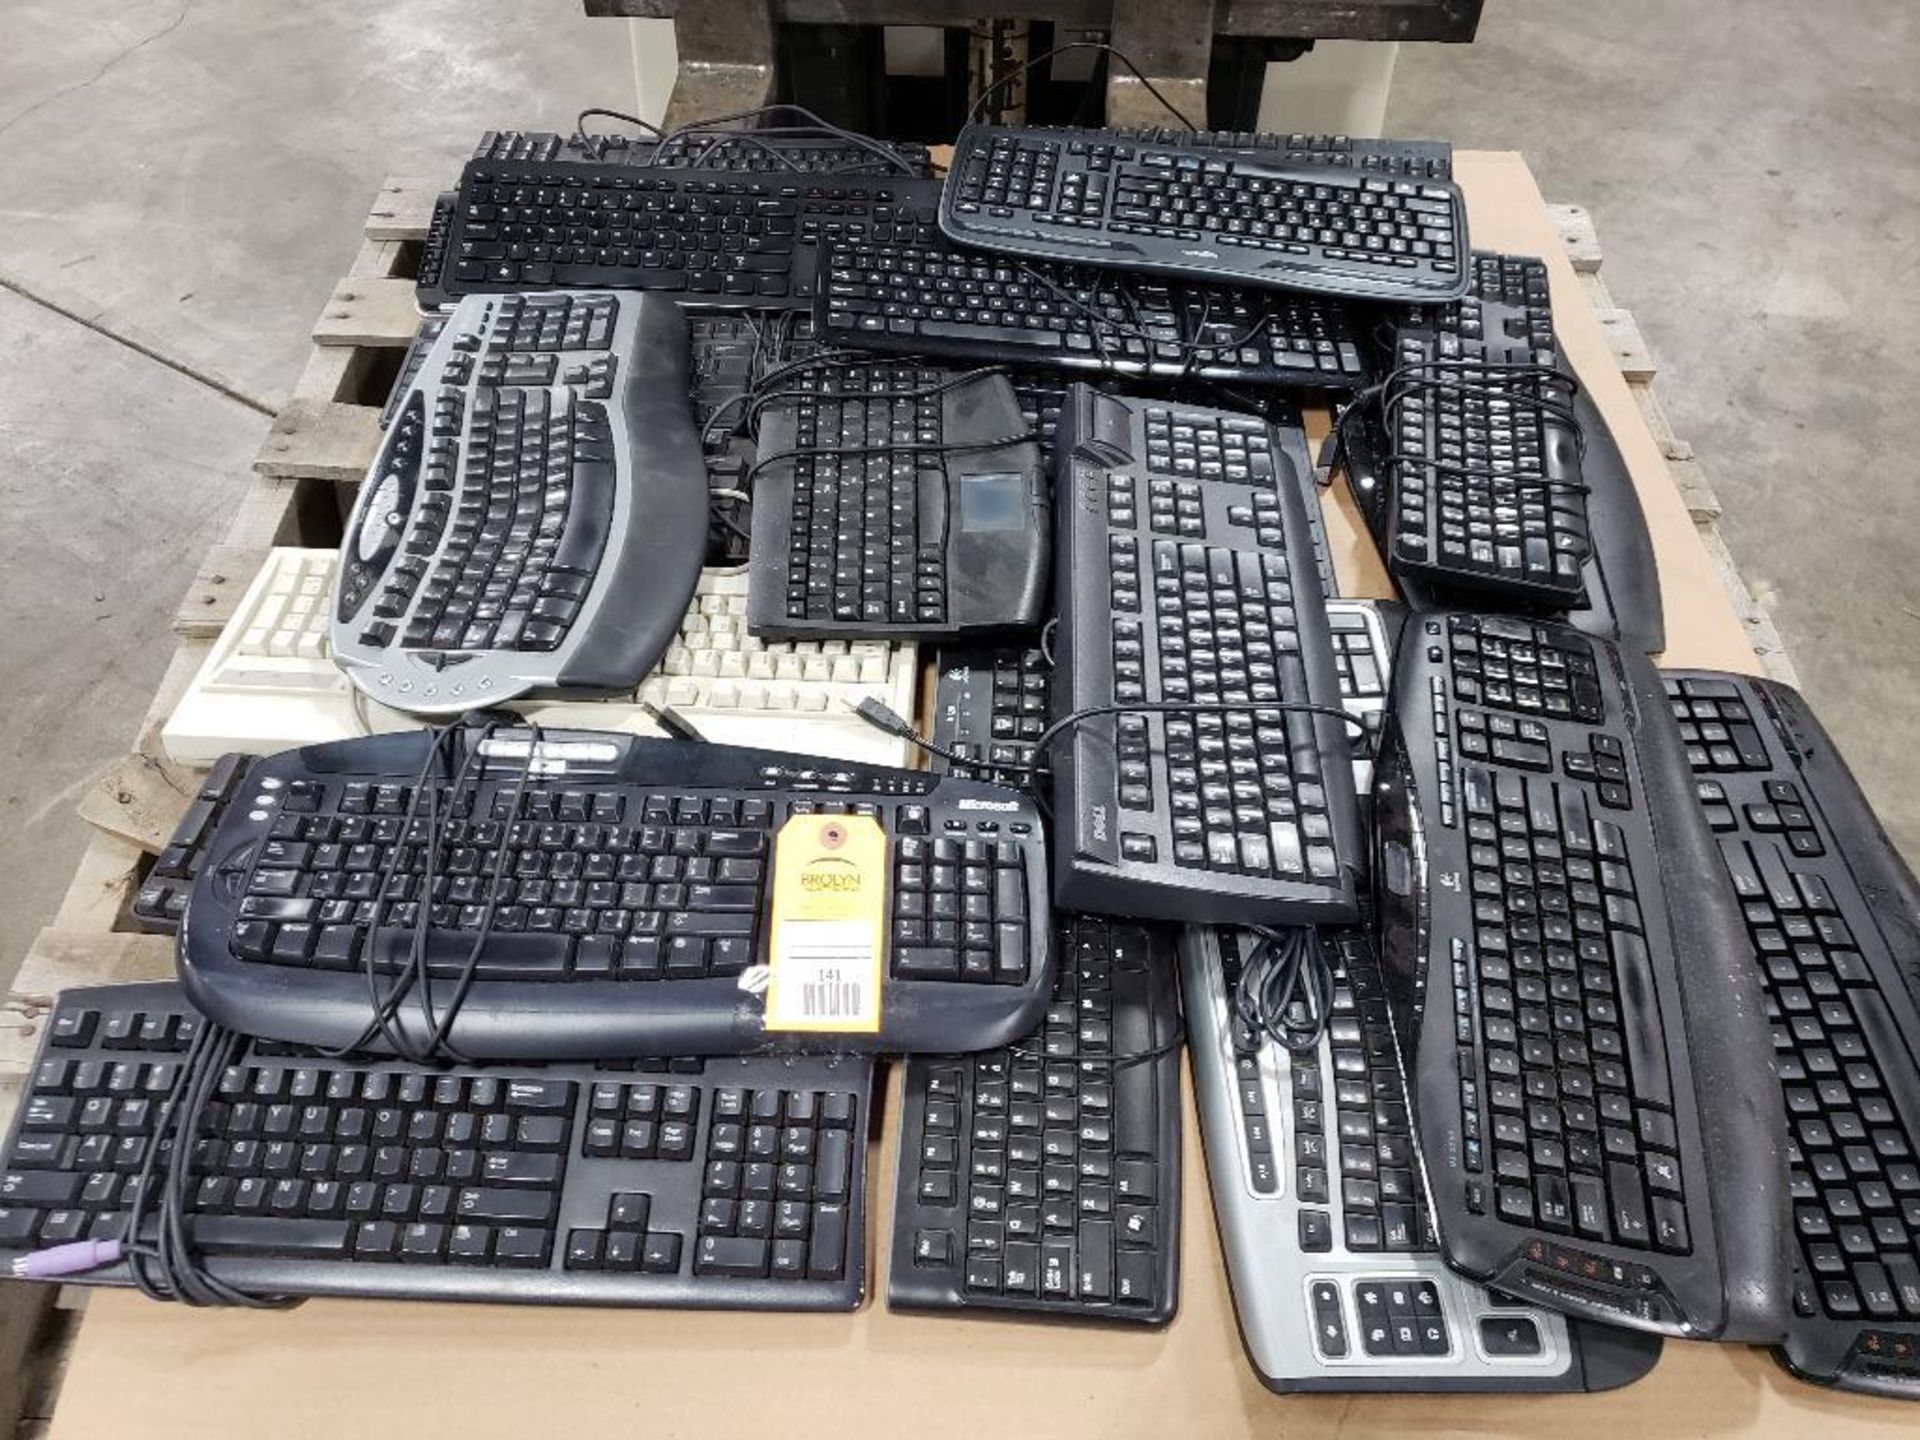 Large assortment of keyboards.